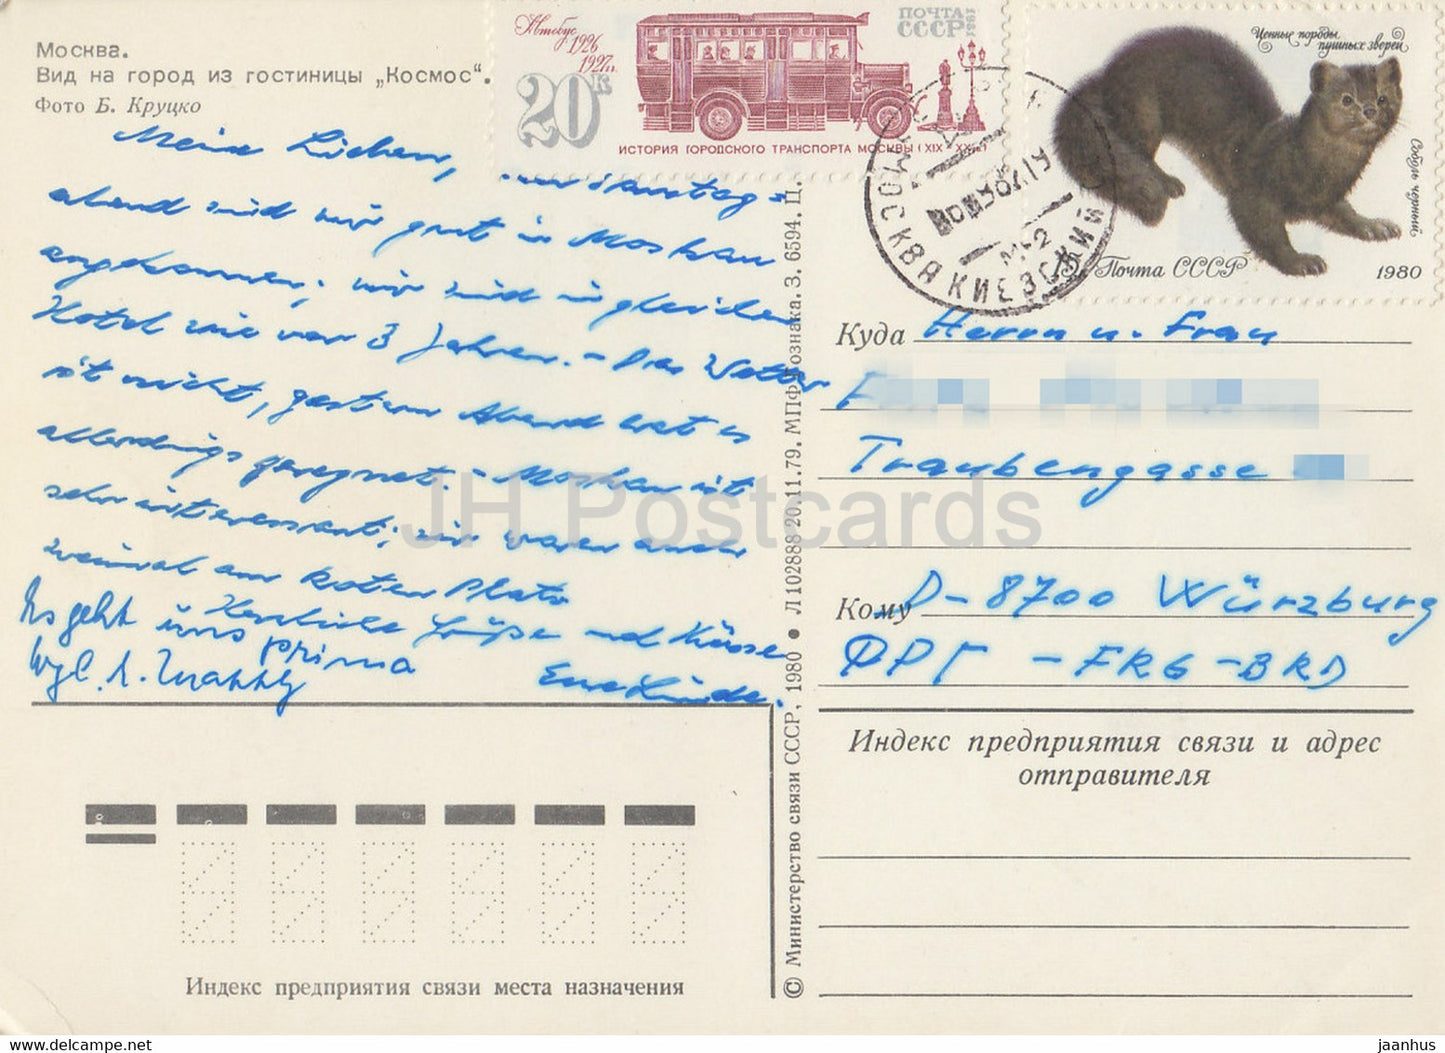 Moscow - City view from the hotel Kosmos - postal stationery - 1980 - Russia USSR - used